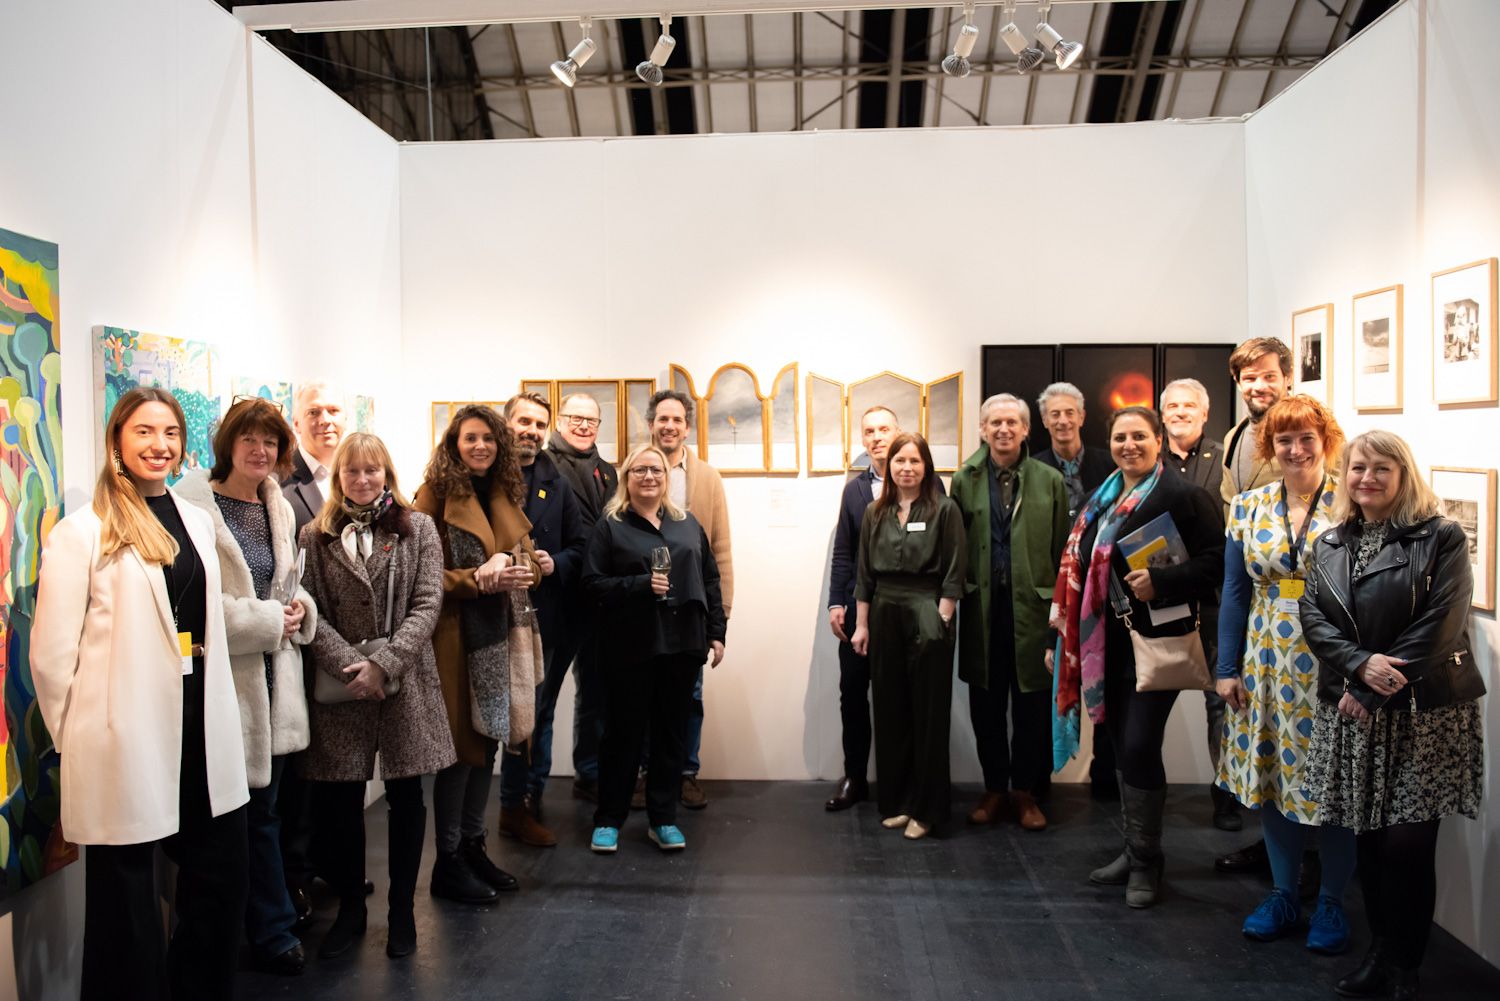 The Manchester Contemporary Acquires Work for Manchester Art Gallery’s Public Collection